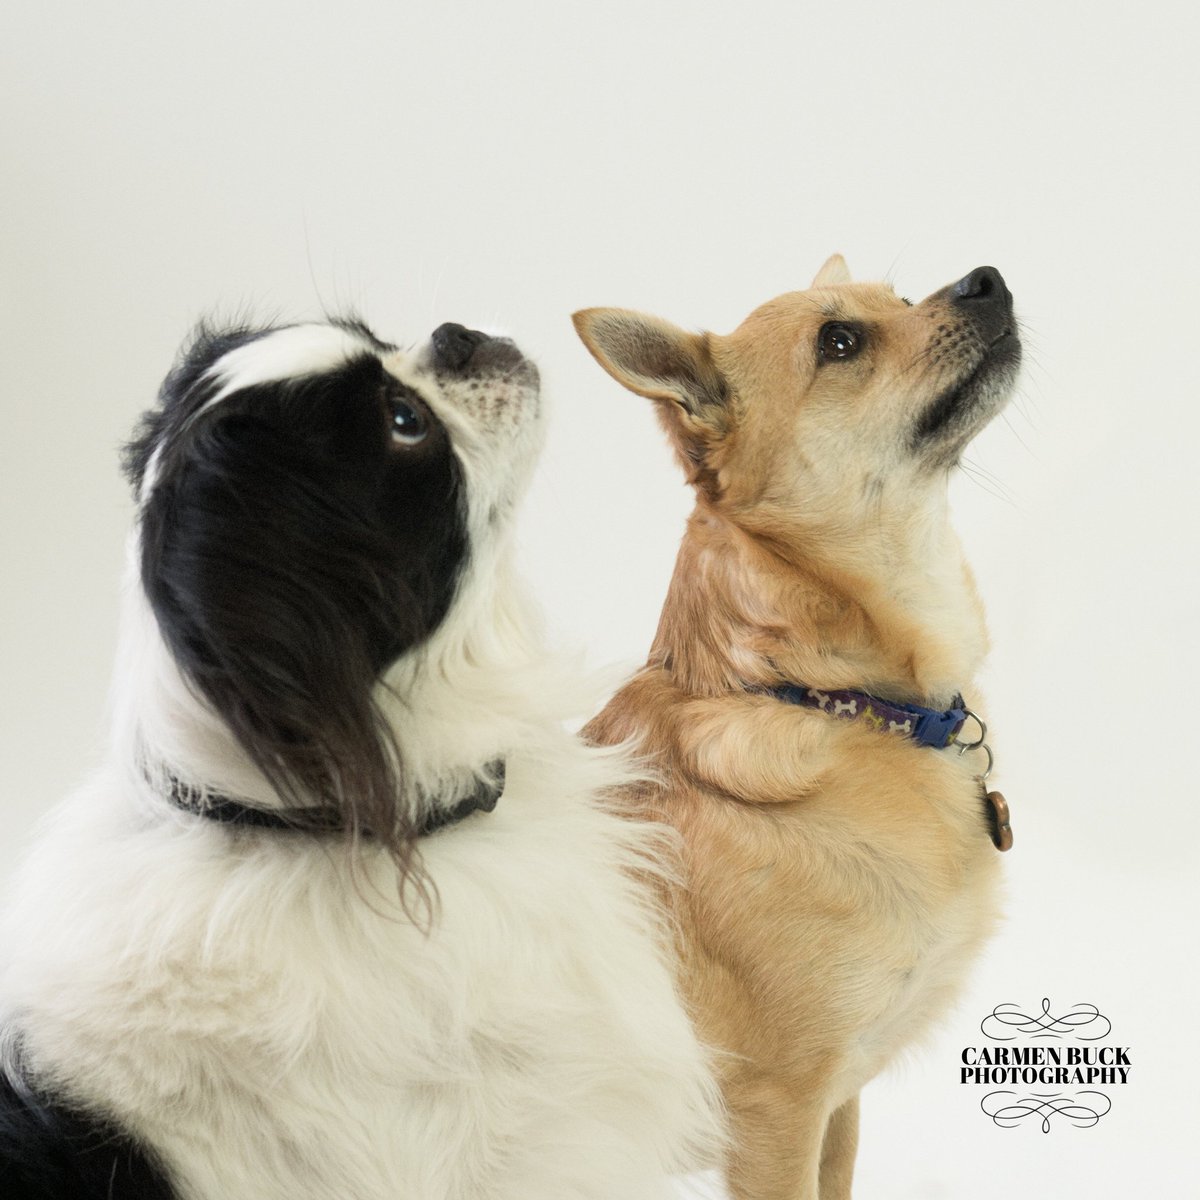 #RoundRockPhotographer- #PetPhotography Like the pic on my new biz card   ow.ly/yul2309OTmq